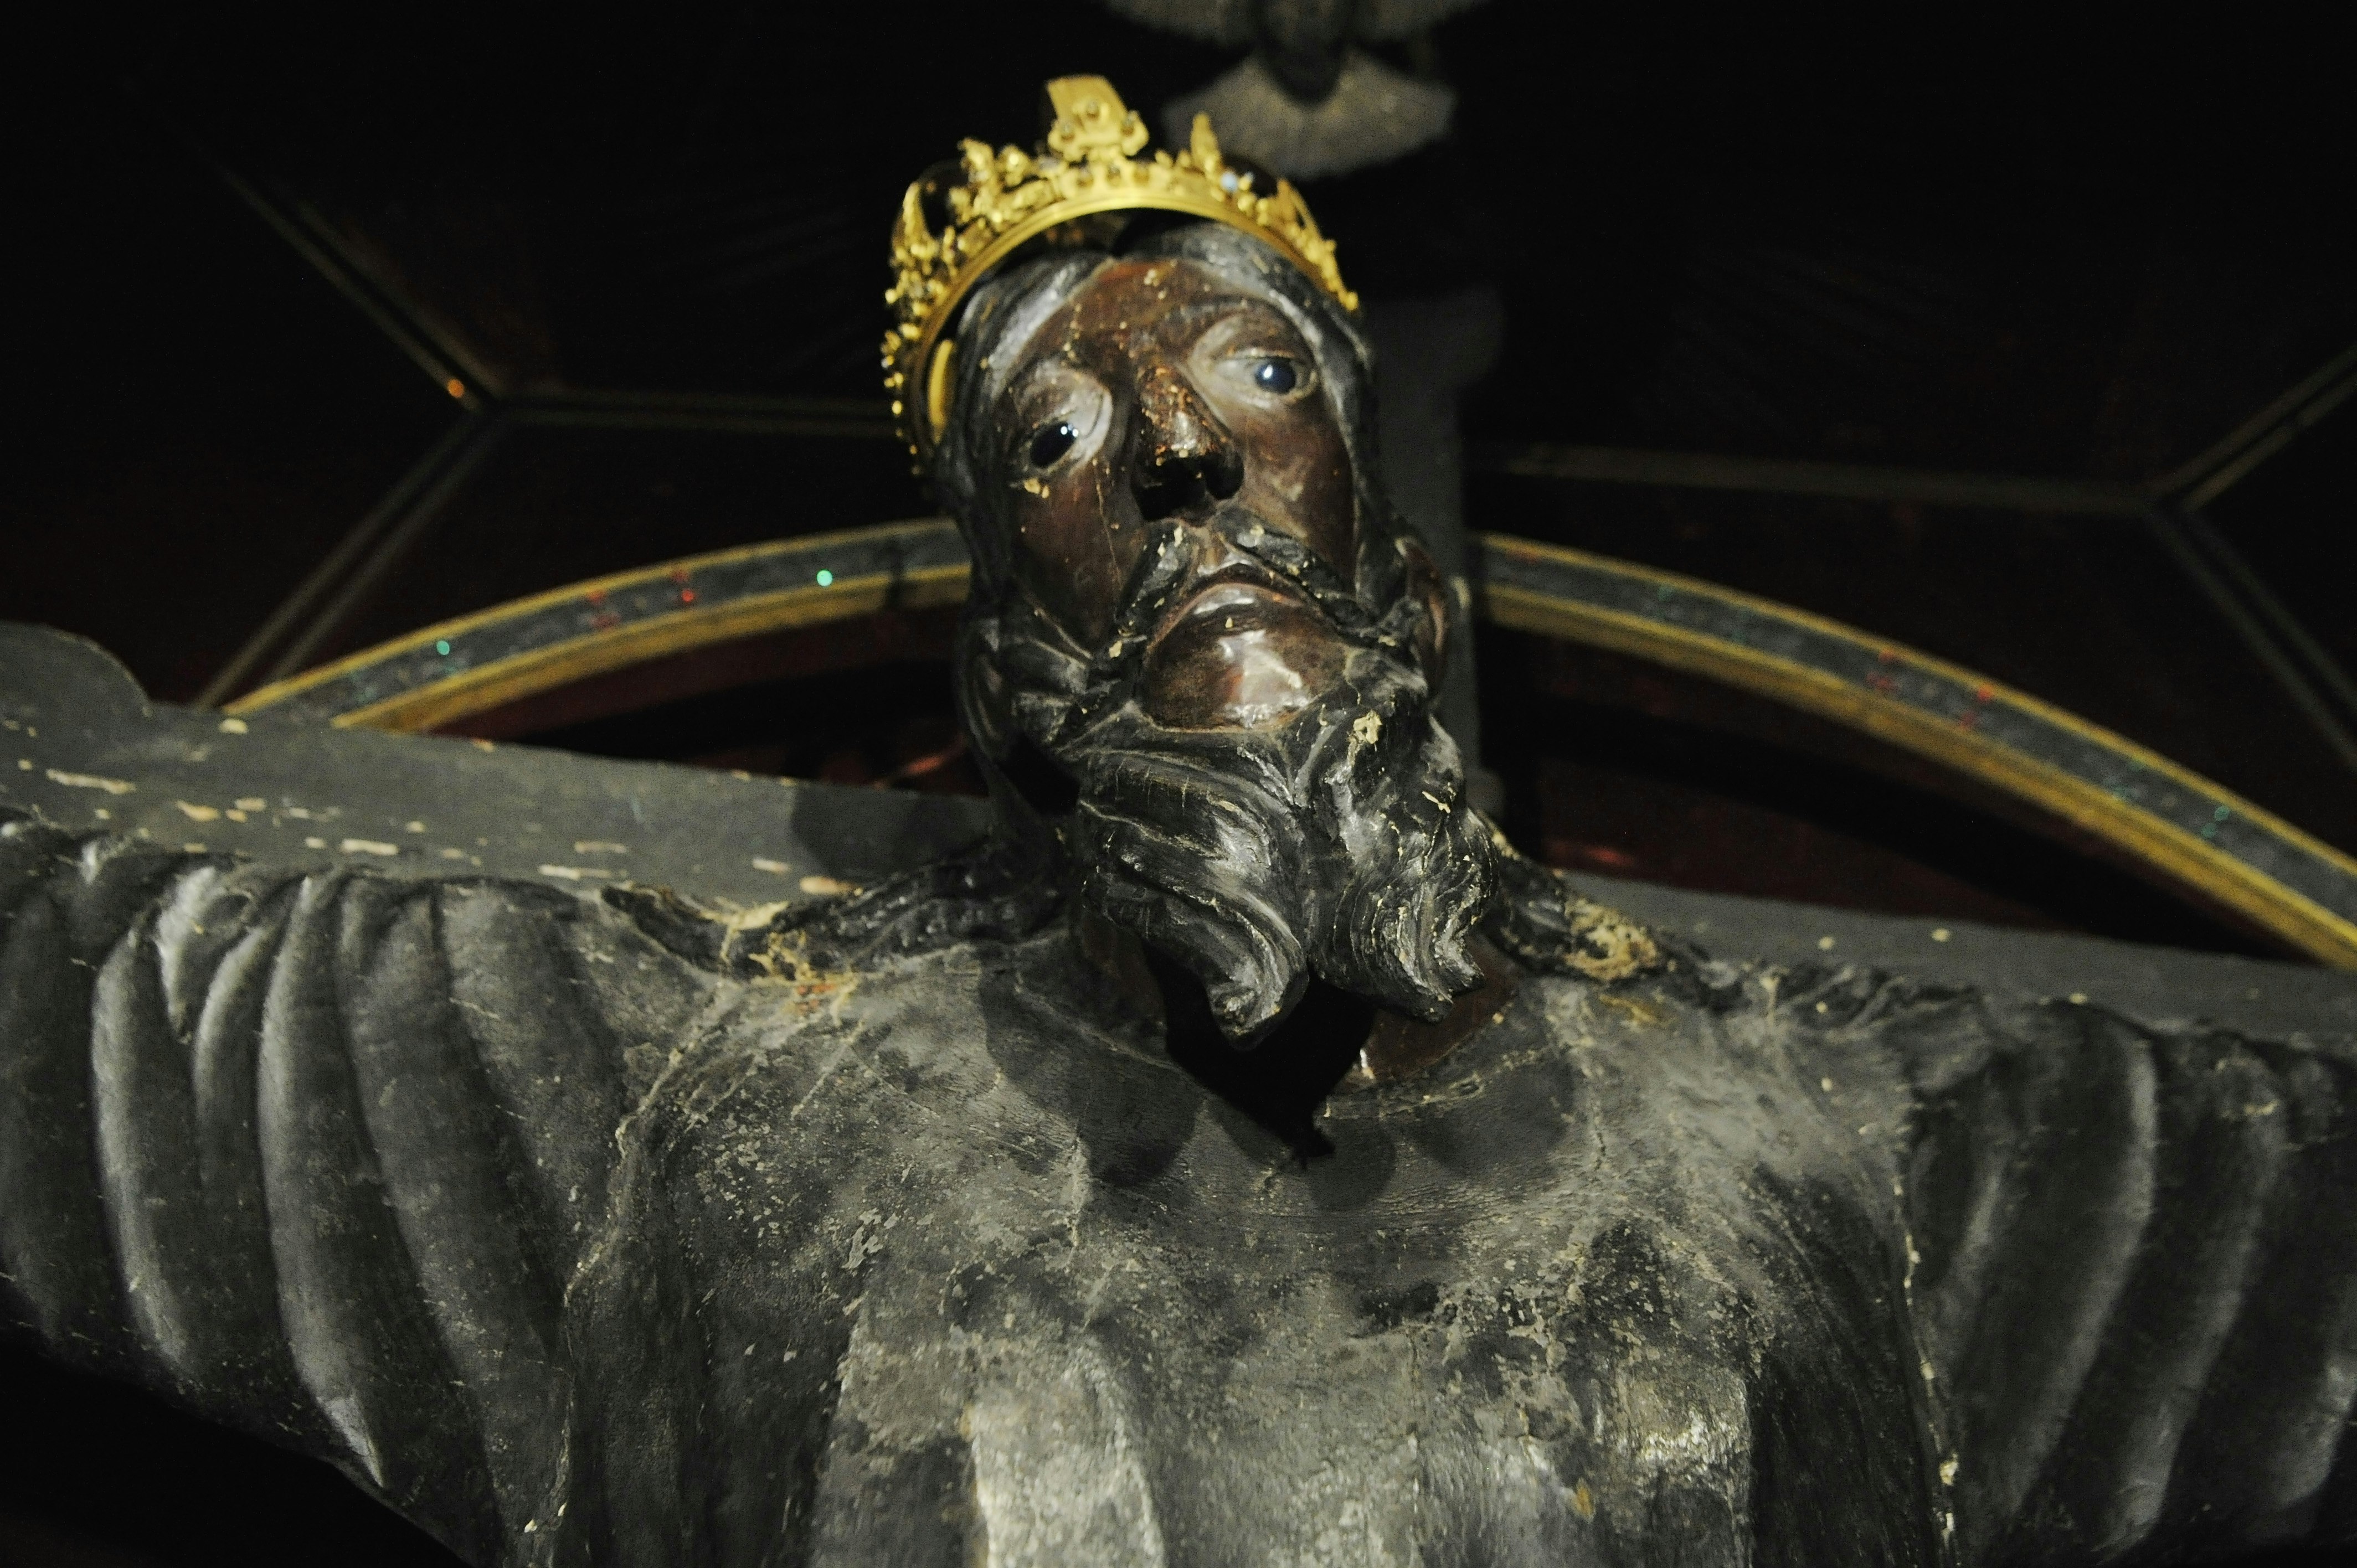 The true Volto Santo di Lucca ('Holy Face of Lucca') and oldest statue of the West in the Cathedral of Lucca